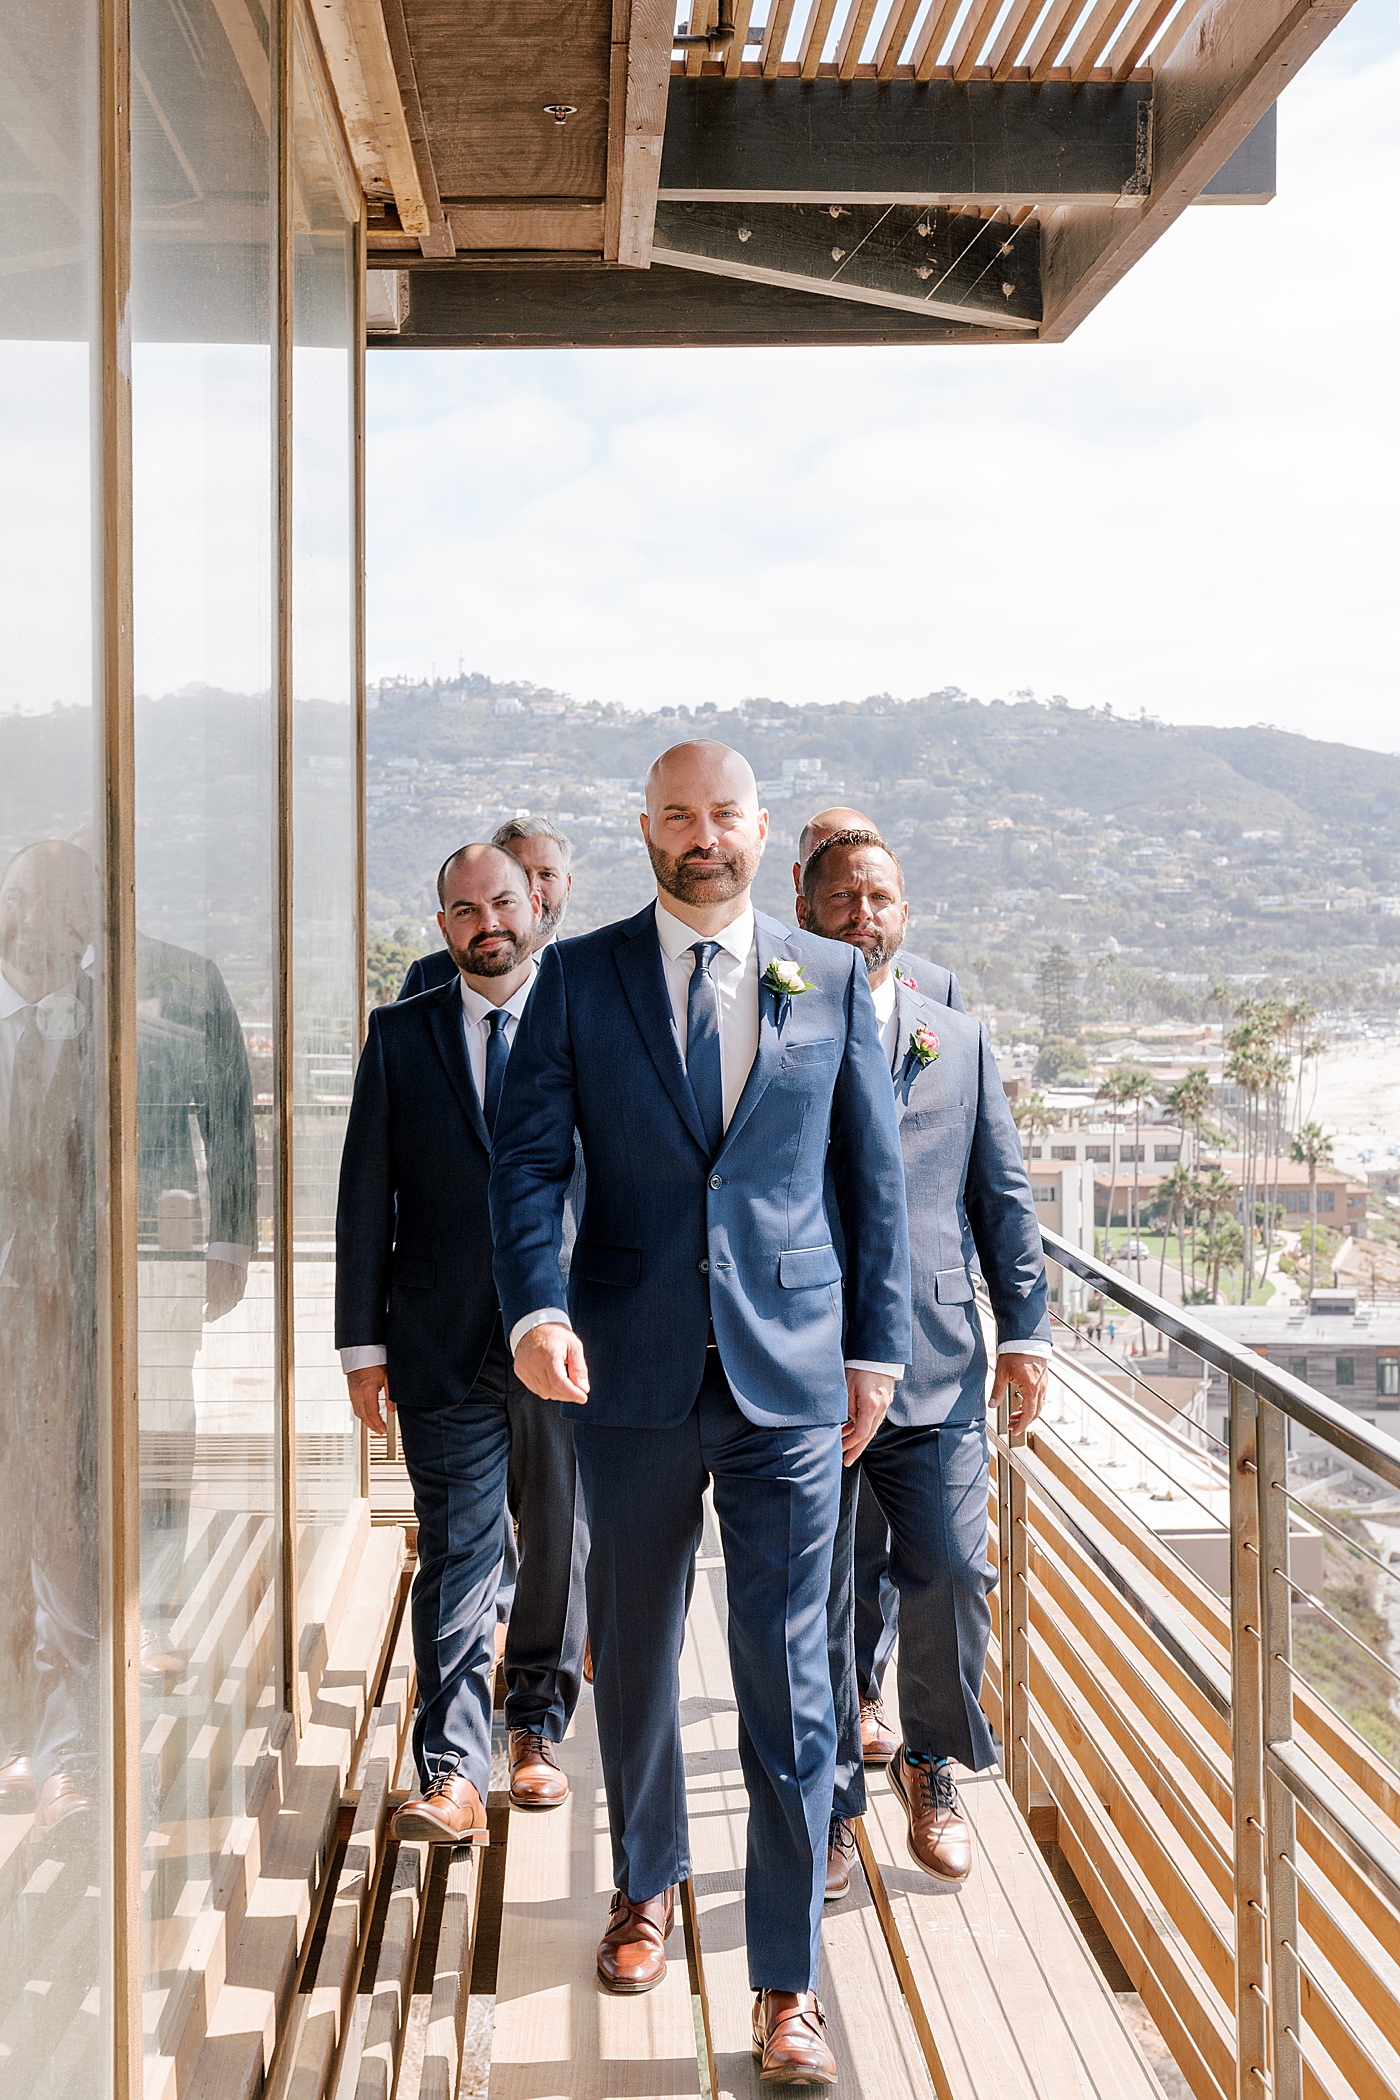 Groom and groomsmen in navy suits walking towards the camera on a balcony overlooking a sunny, tropical city | Image by Hope Helmuth Photography